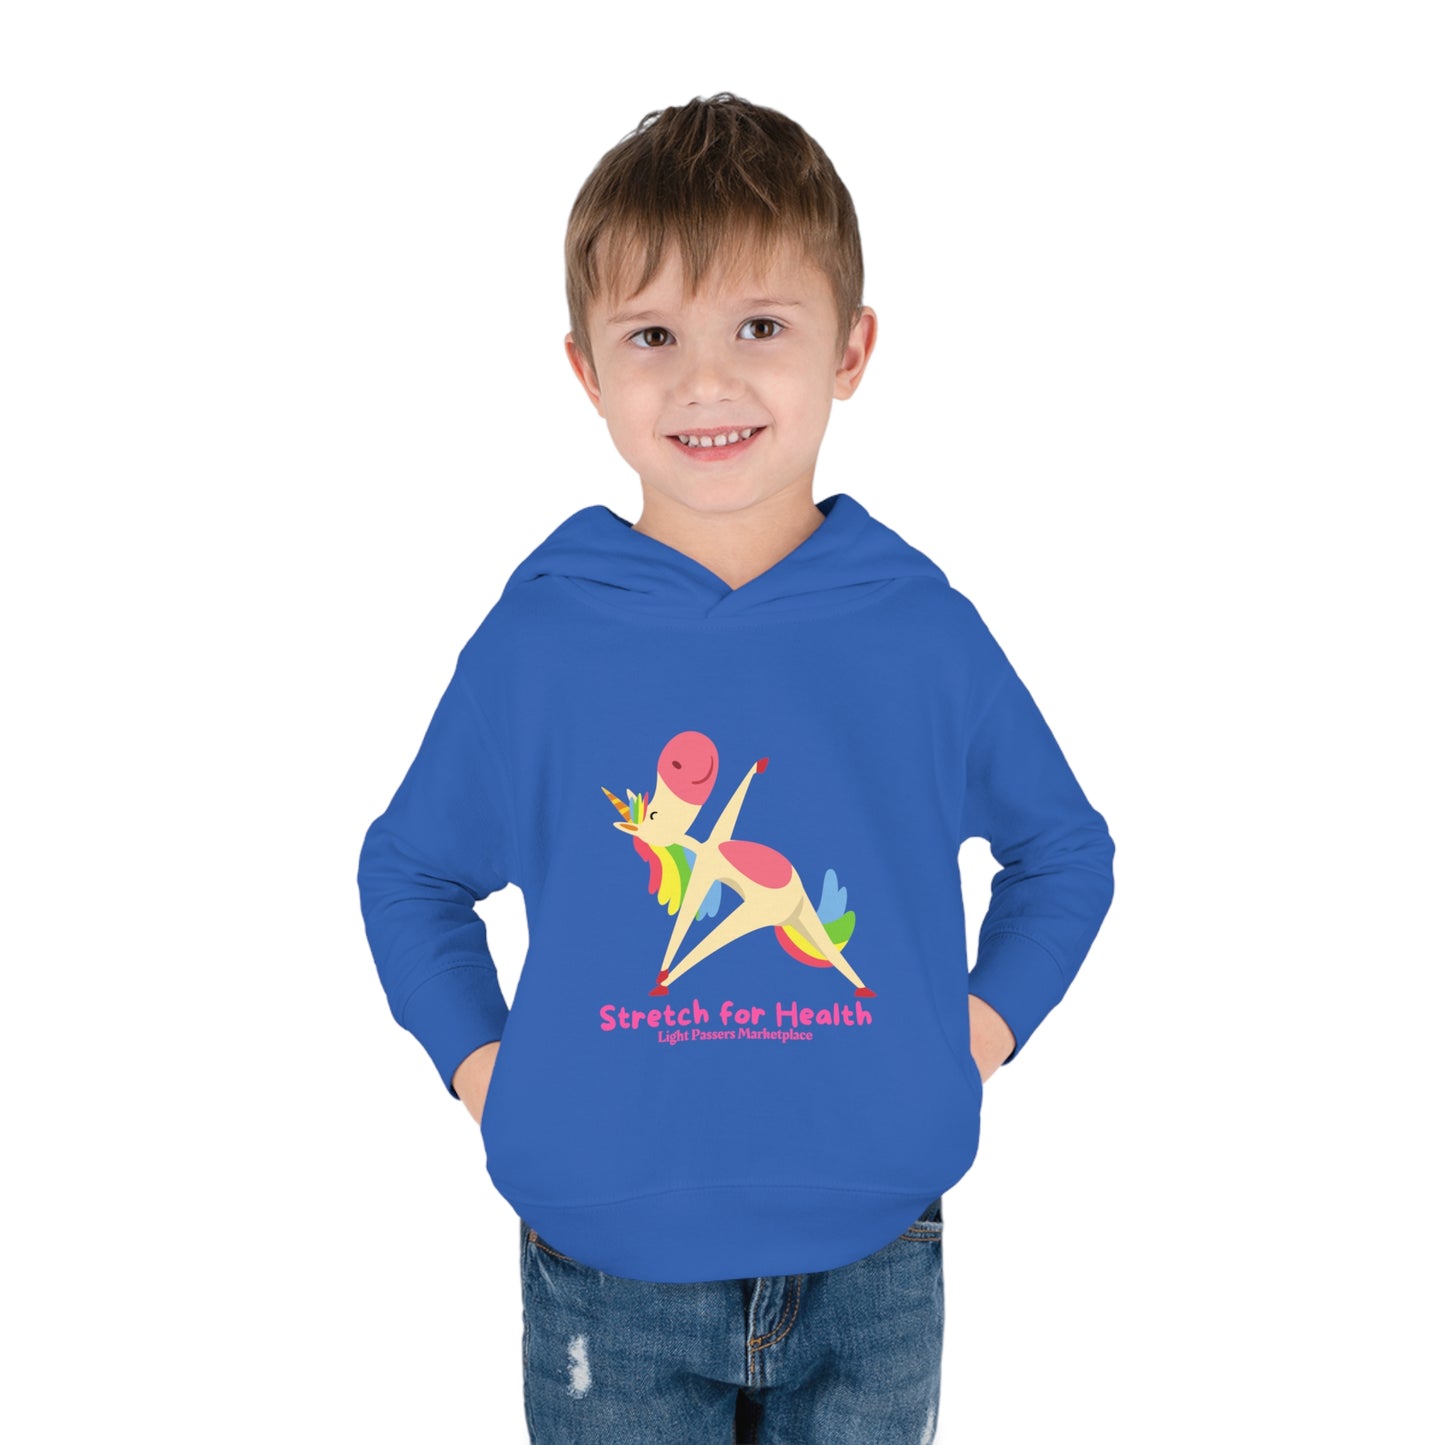 A smiling boy in a Rabbit Skins Unicorn Stretch Toddler Hooded Sweatshirt with side seam pockets, jersey-lined hood, and durable stitching for lasting coziness.